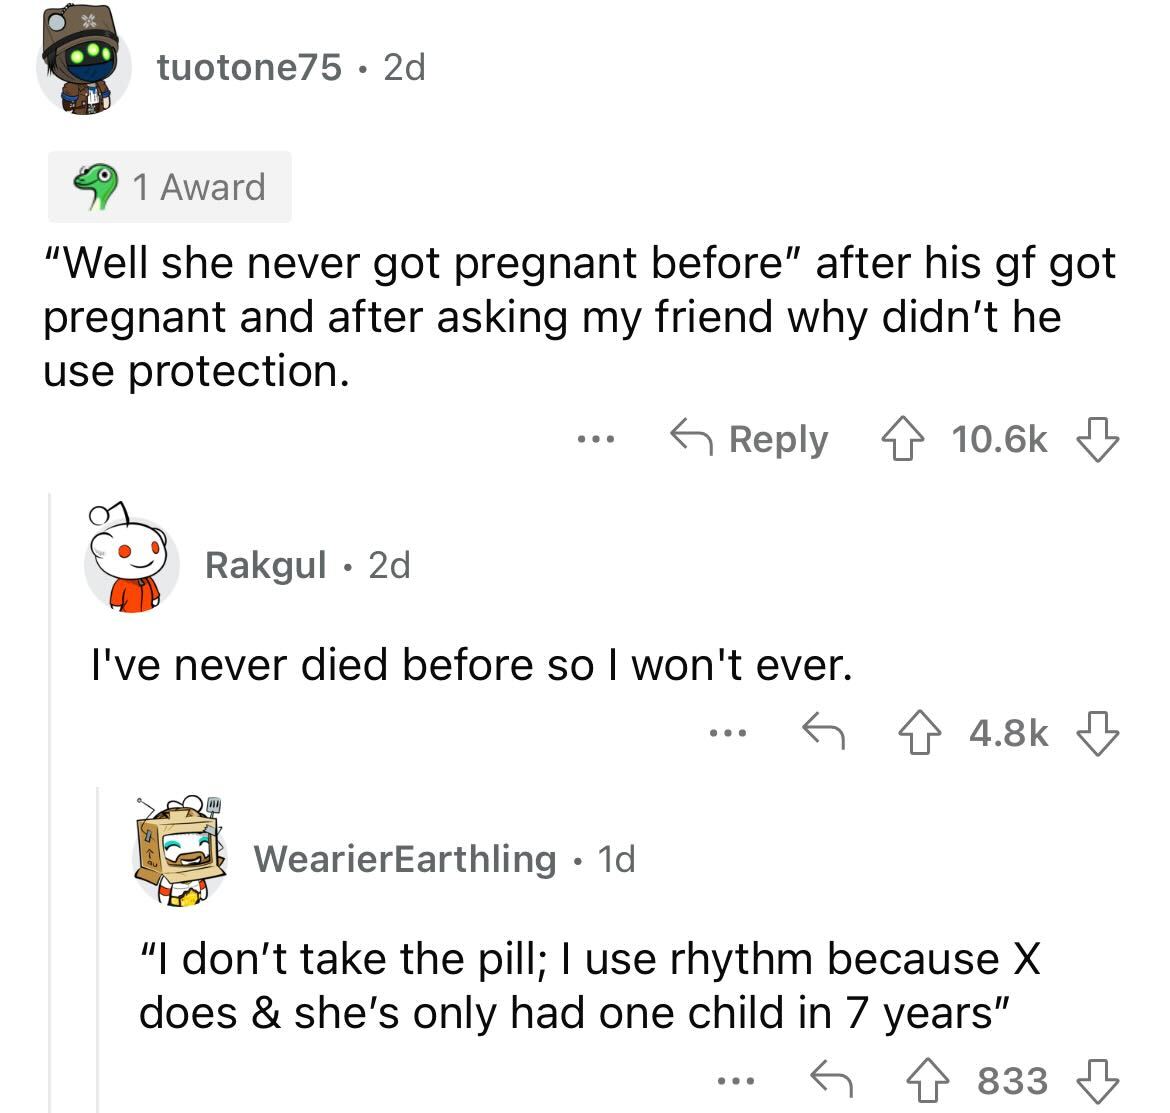 tuotone75 2d 1 Award "Well she never got pregnant before" after his gf got pregnant and after asking my friend why didn't he use protection. ... Rakgul 2d I've never died before so I won't ever. WearierEarthling 1d "I don't take the pill; I use rhythm…